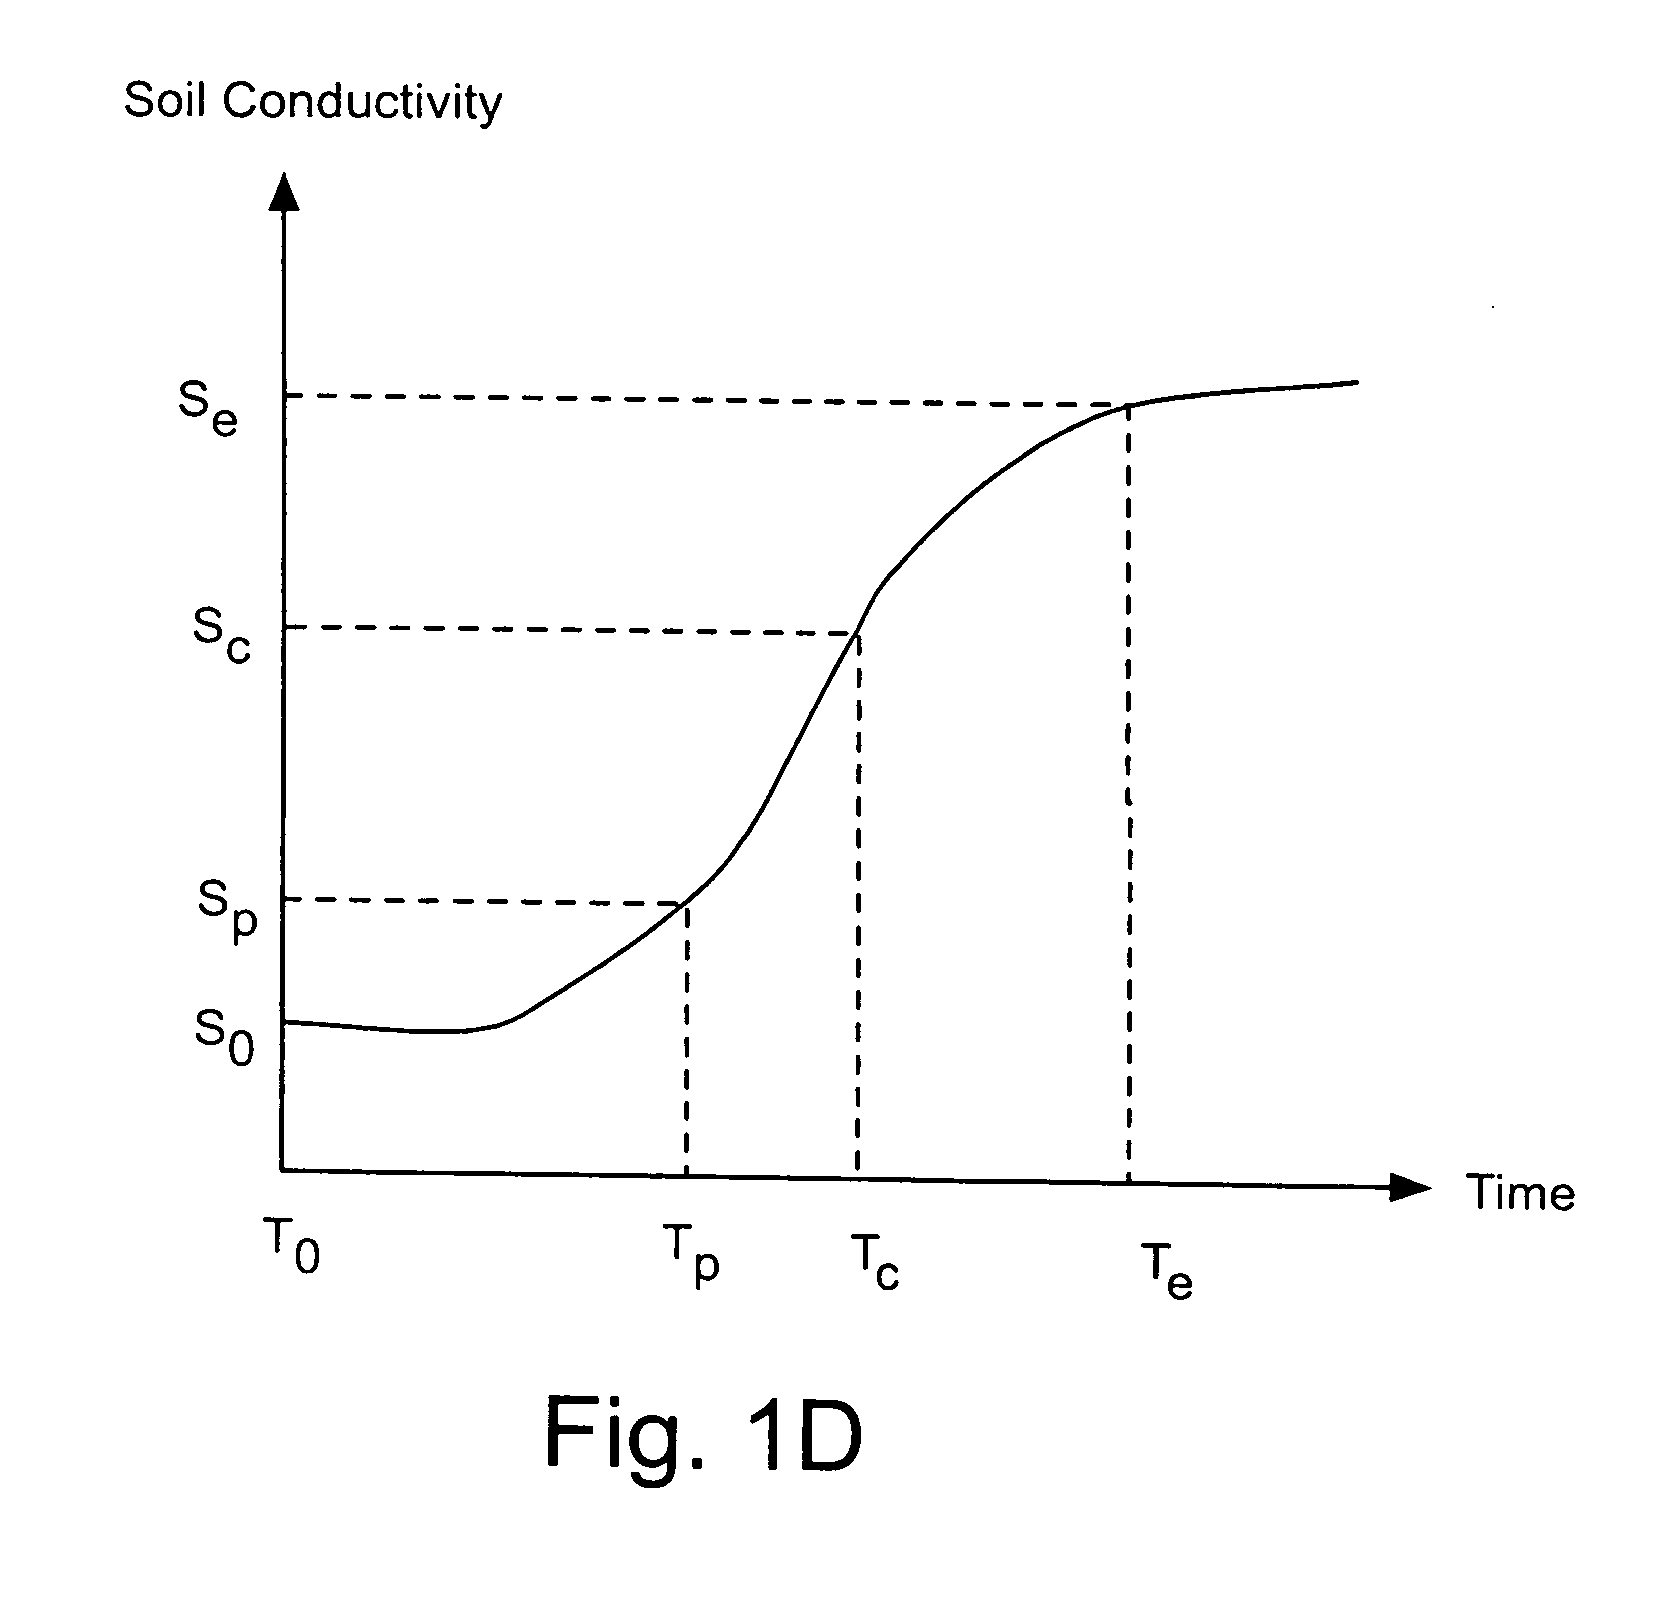 Method and apparatus using soil conductivity thresholds to control irrigating plants